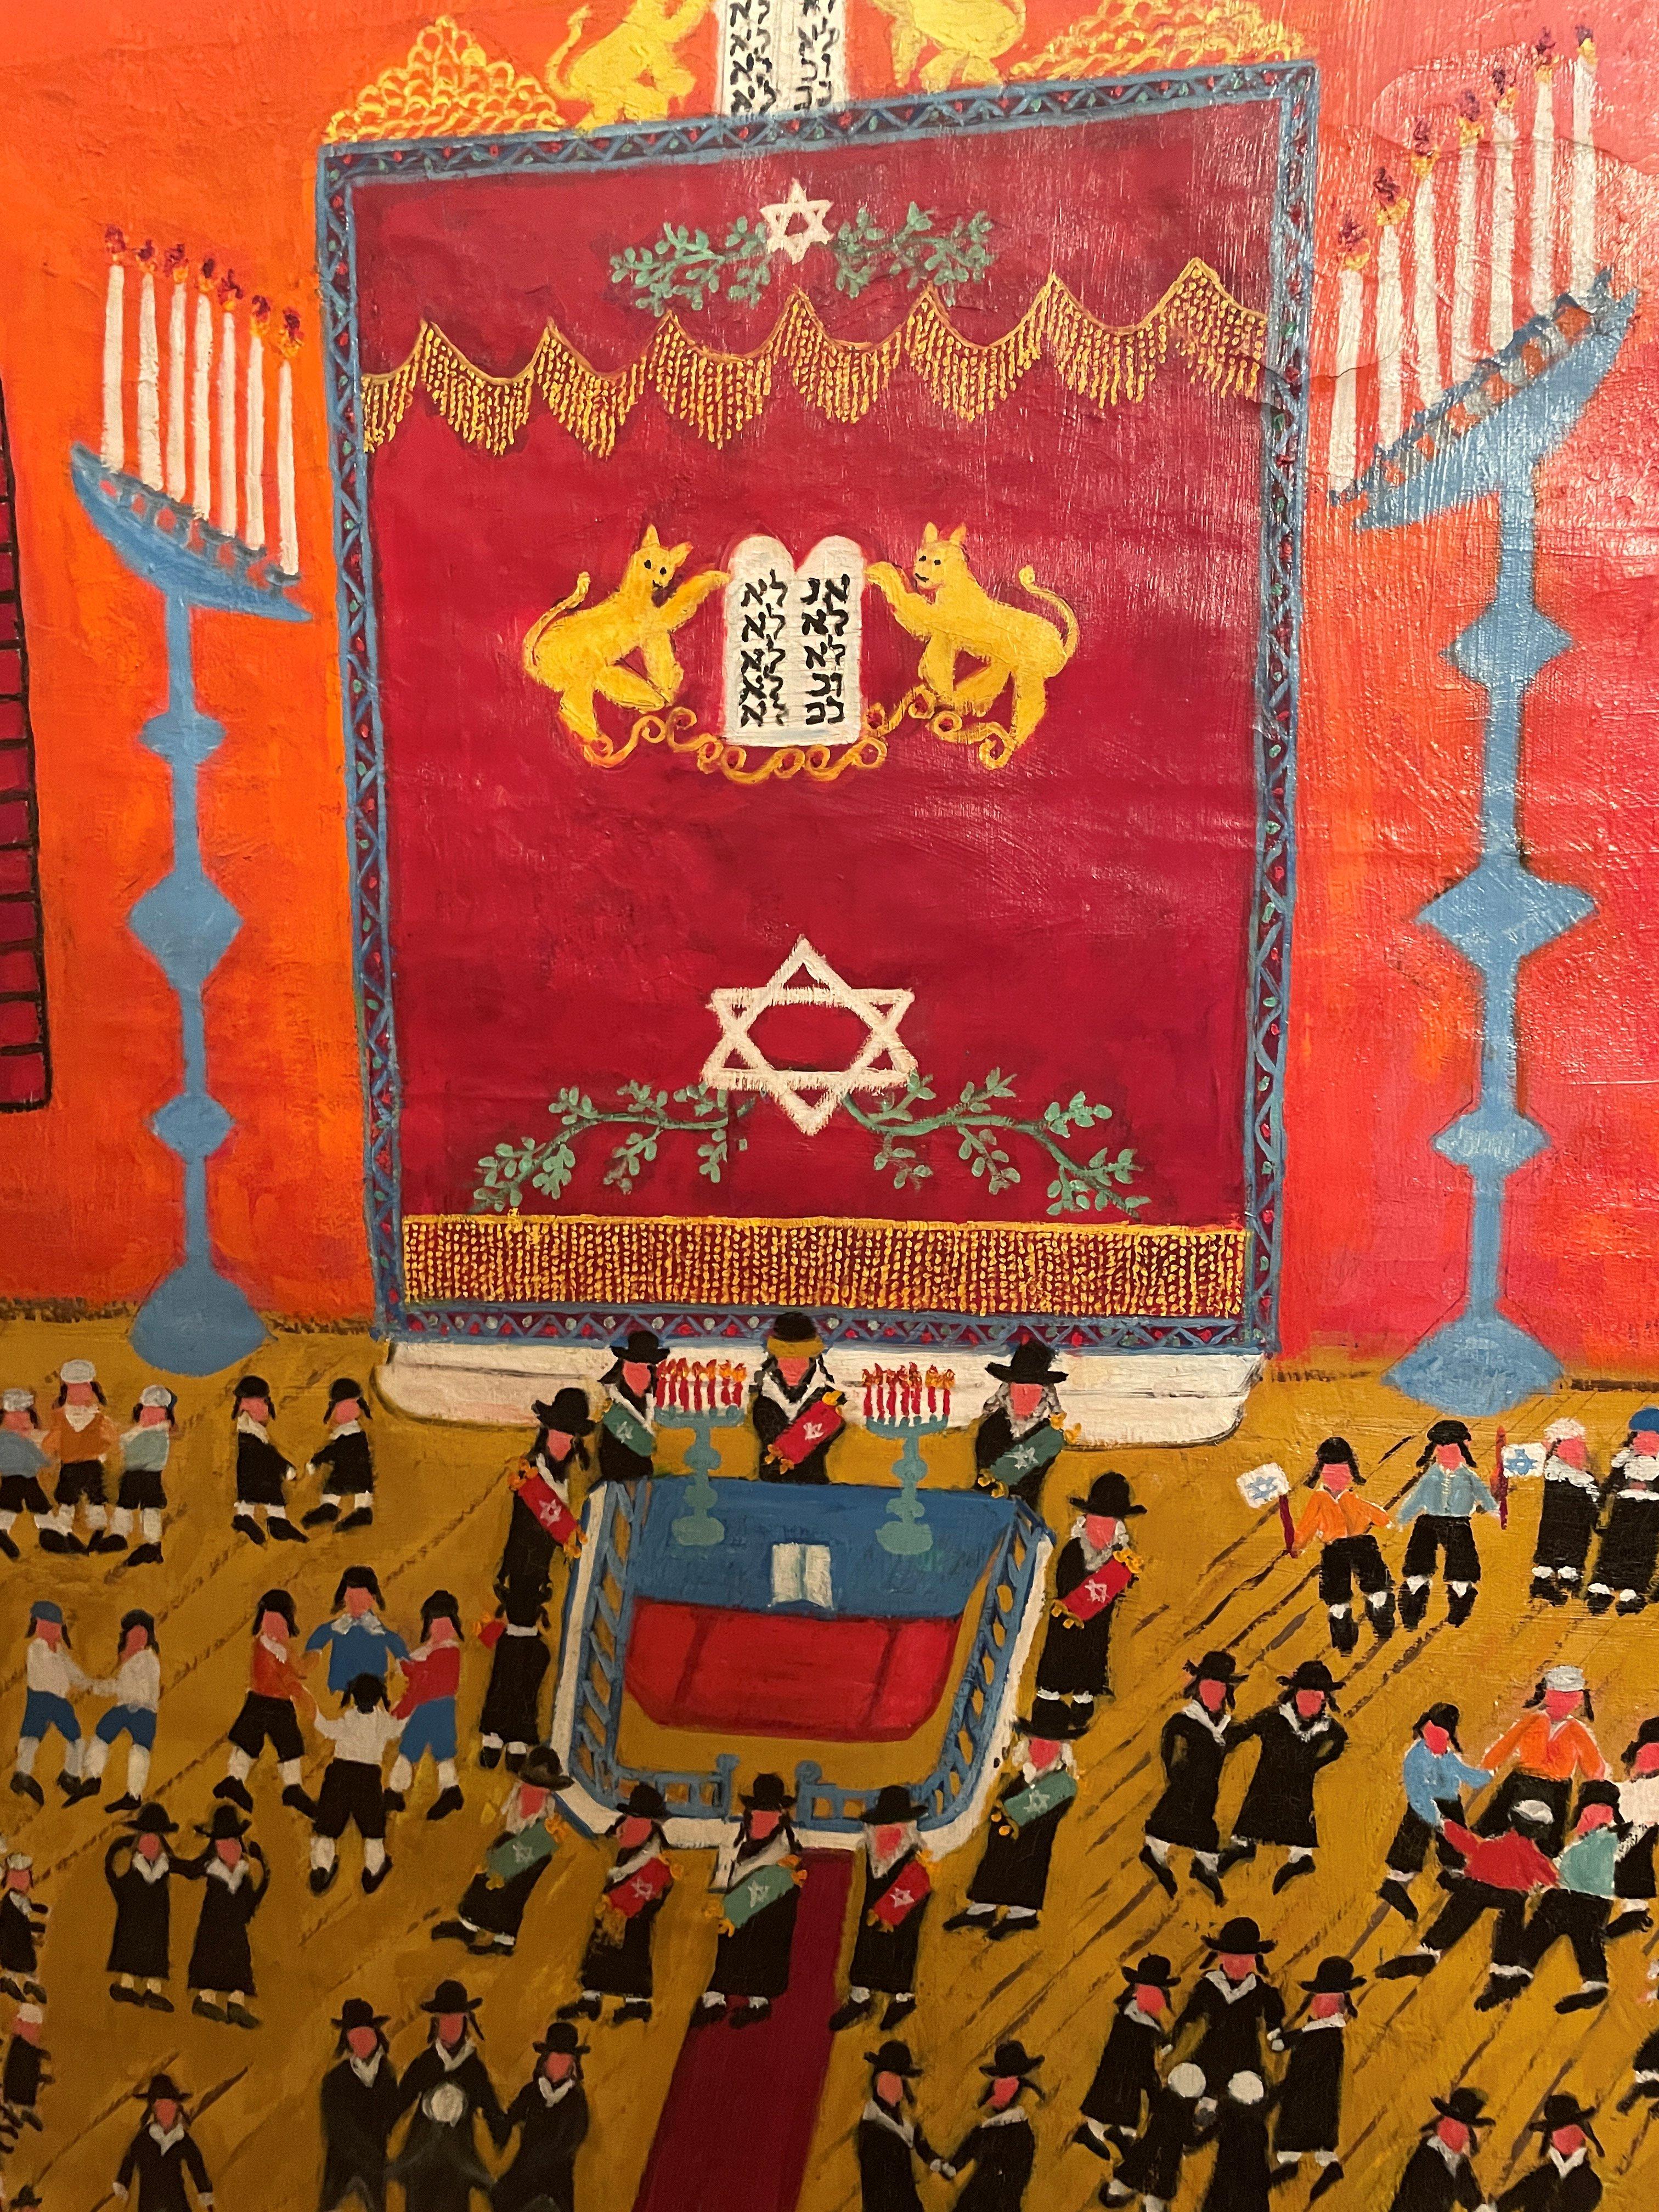 Leo Schutzman (1878 - 1962)
Simchat Torah in the Synagogue, circa 1958
Oil on canvas
40 x 36 inches
Signed lower left

Provenance:
The Contemporaries Gallery, New York, circa 1958

Leo (Kyle) Schutzman (1878-1962) developed a reputation in New York